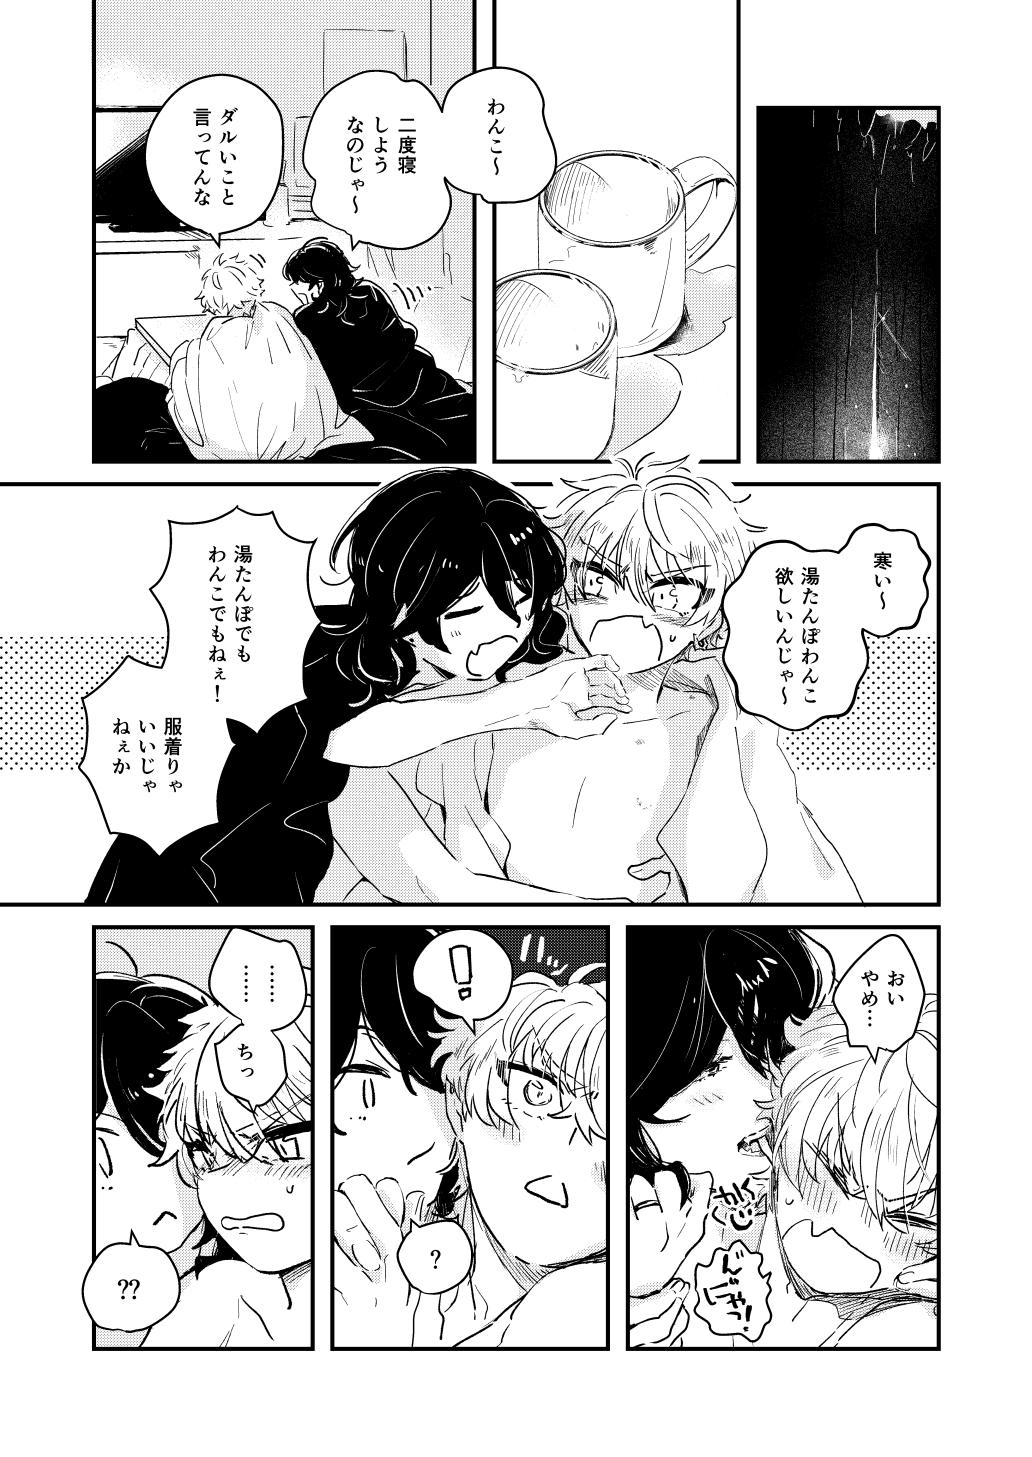 Messy morning engage - Ensemble stars Real Amatuer Porn - Page 5